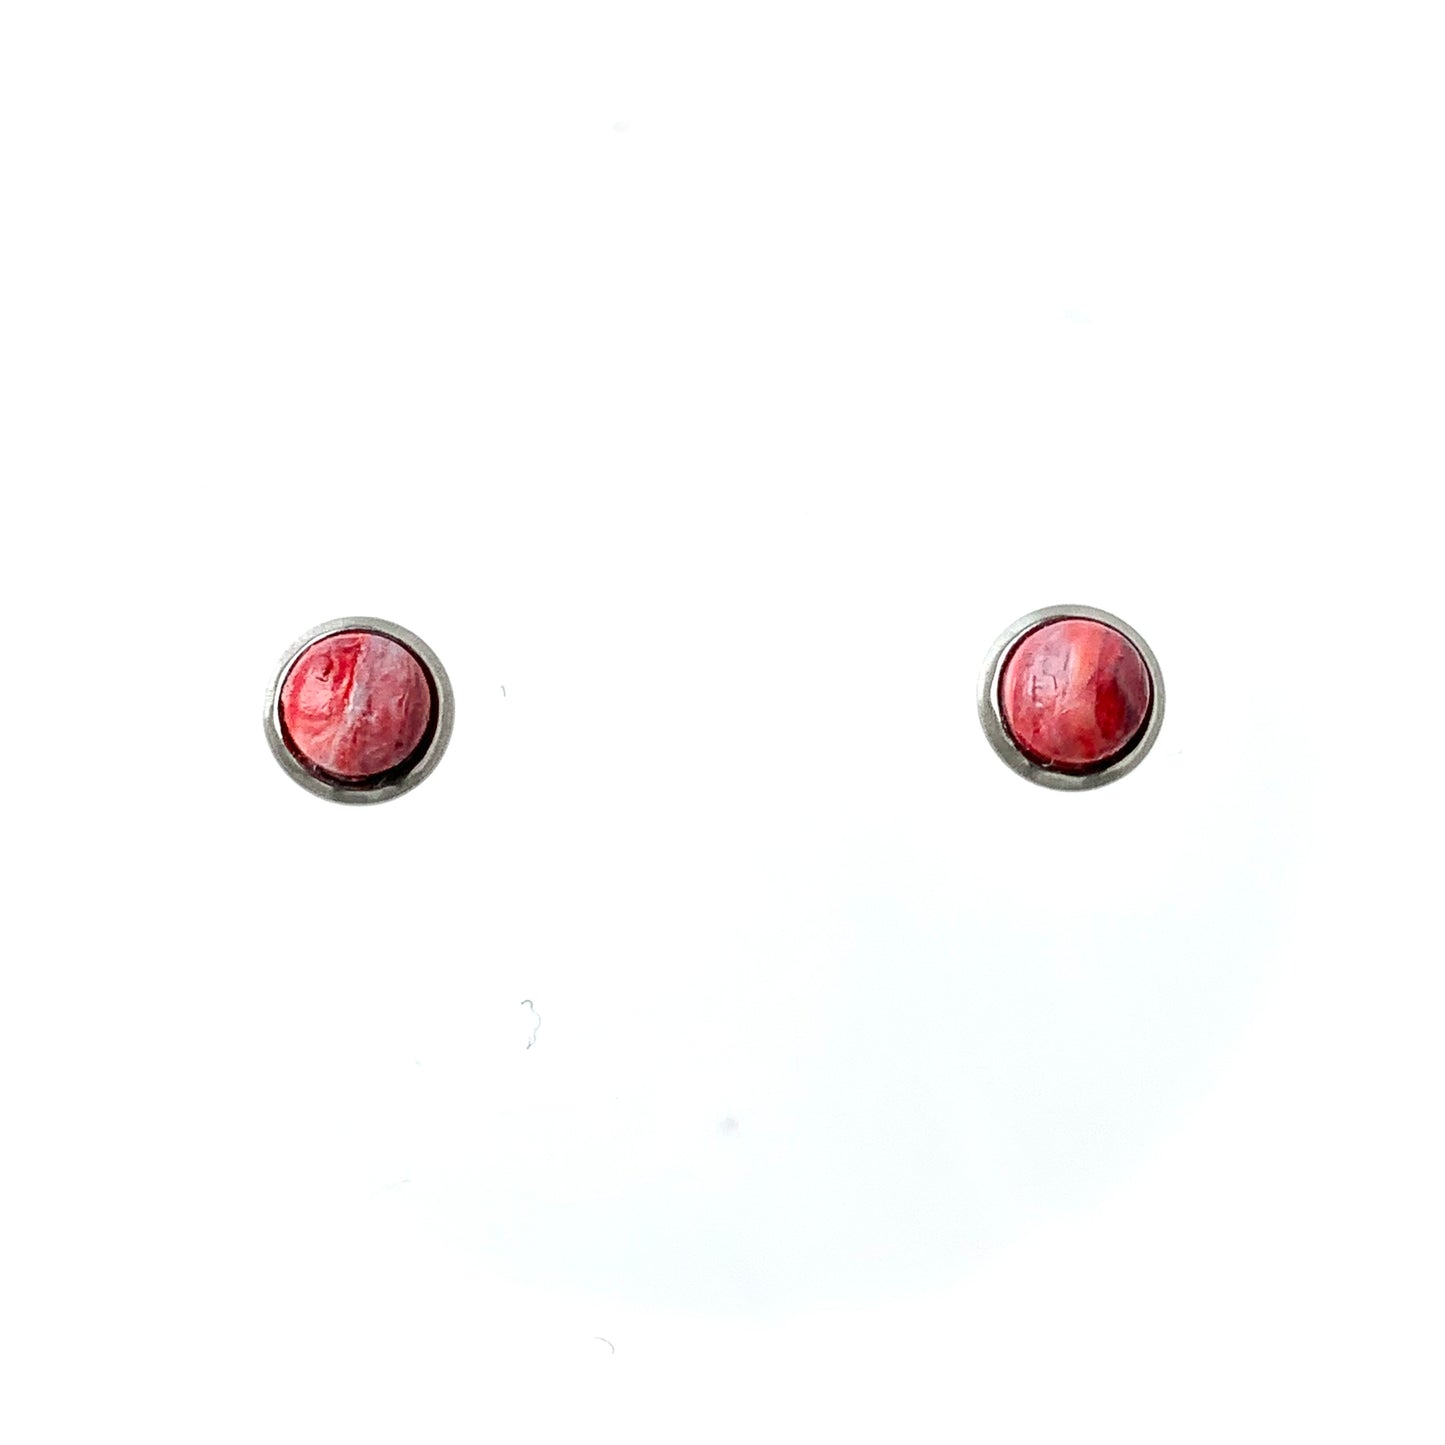 Small red studs handmade stainless steel 